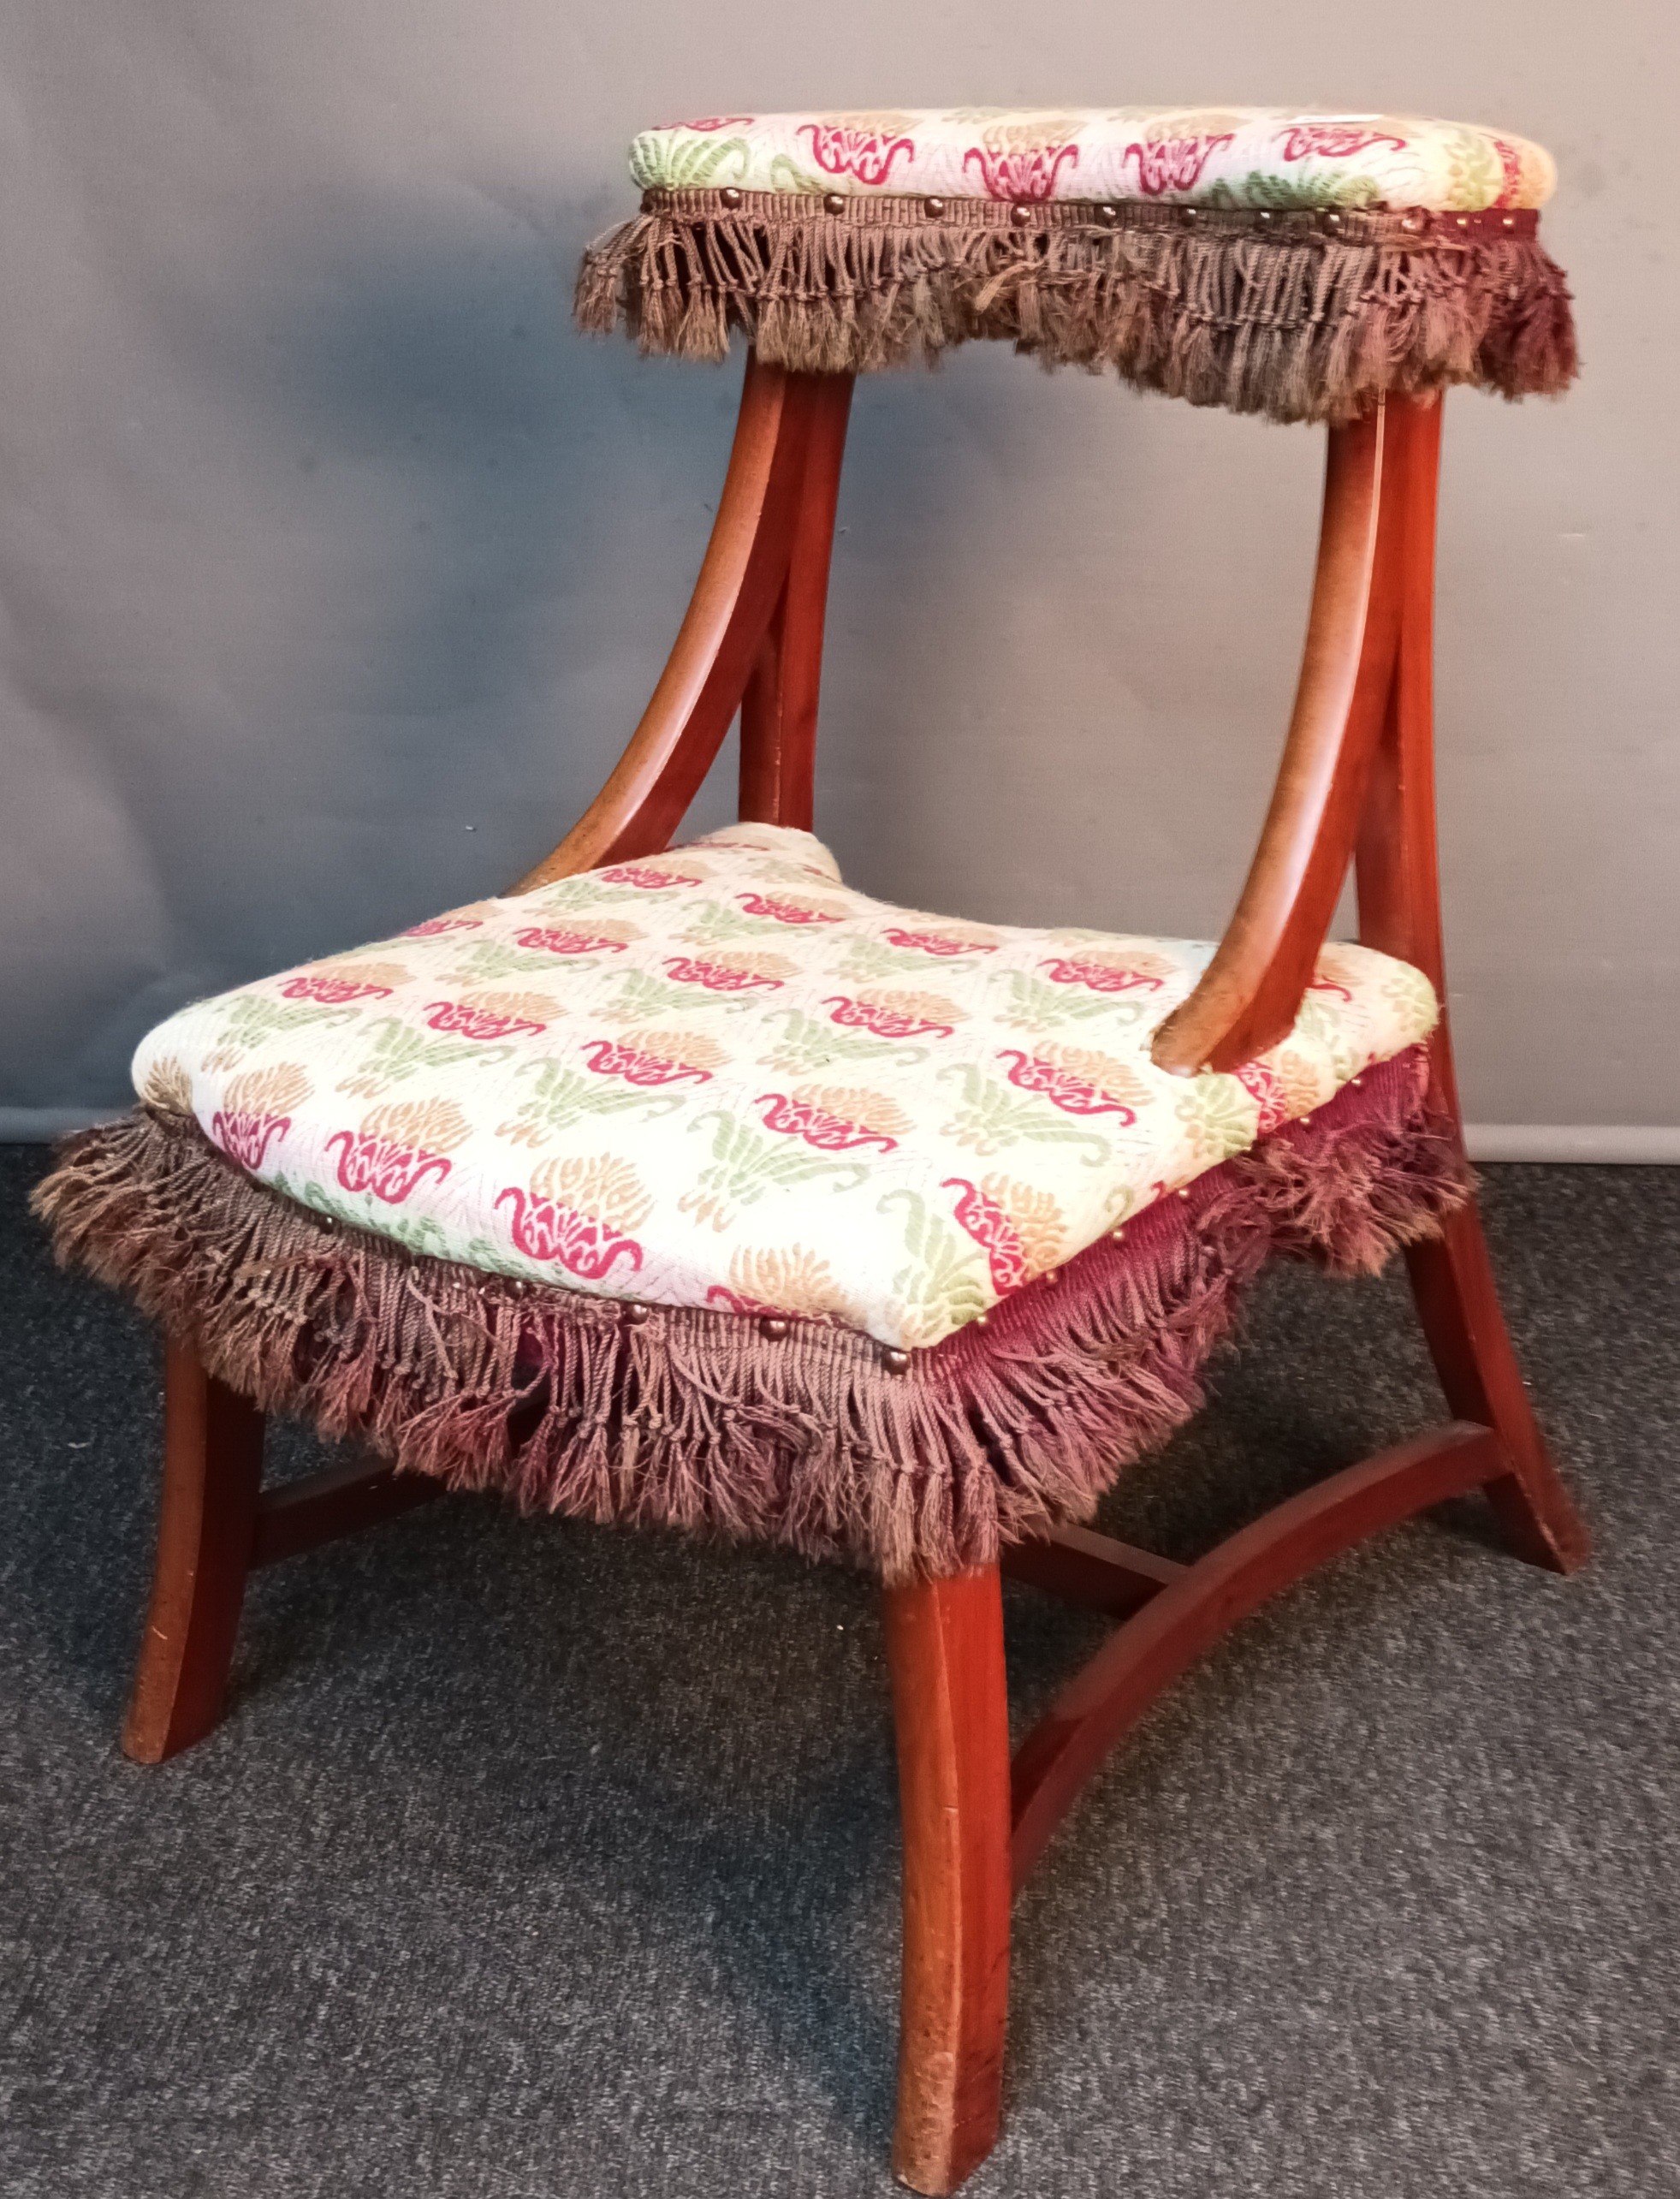 19th century prayer stool/ chair, upholstered in a floral material with brown fringe, raised on